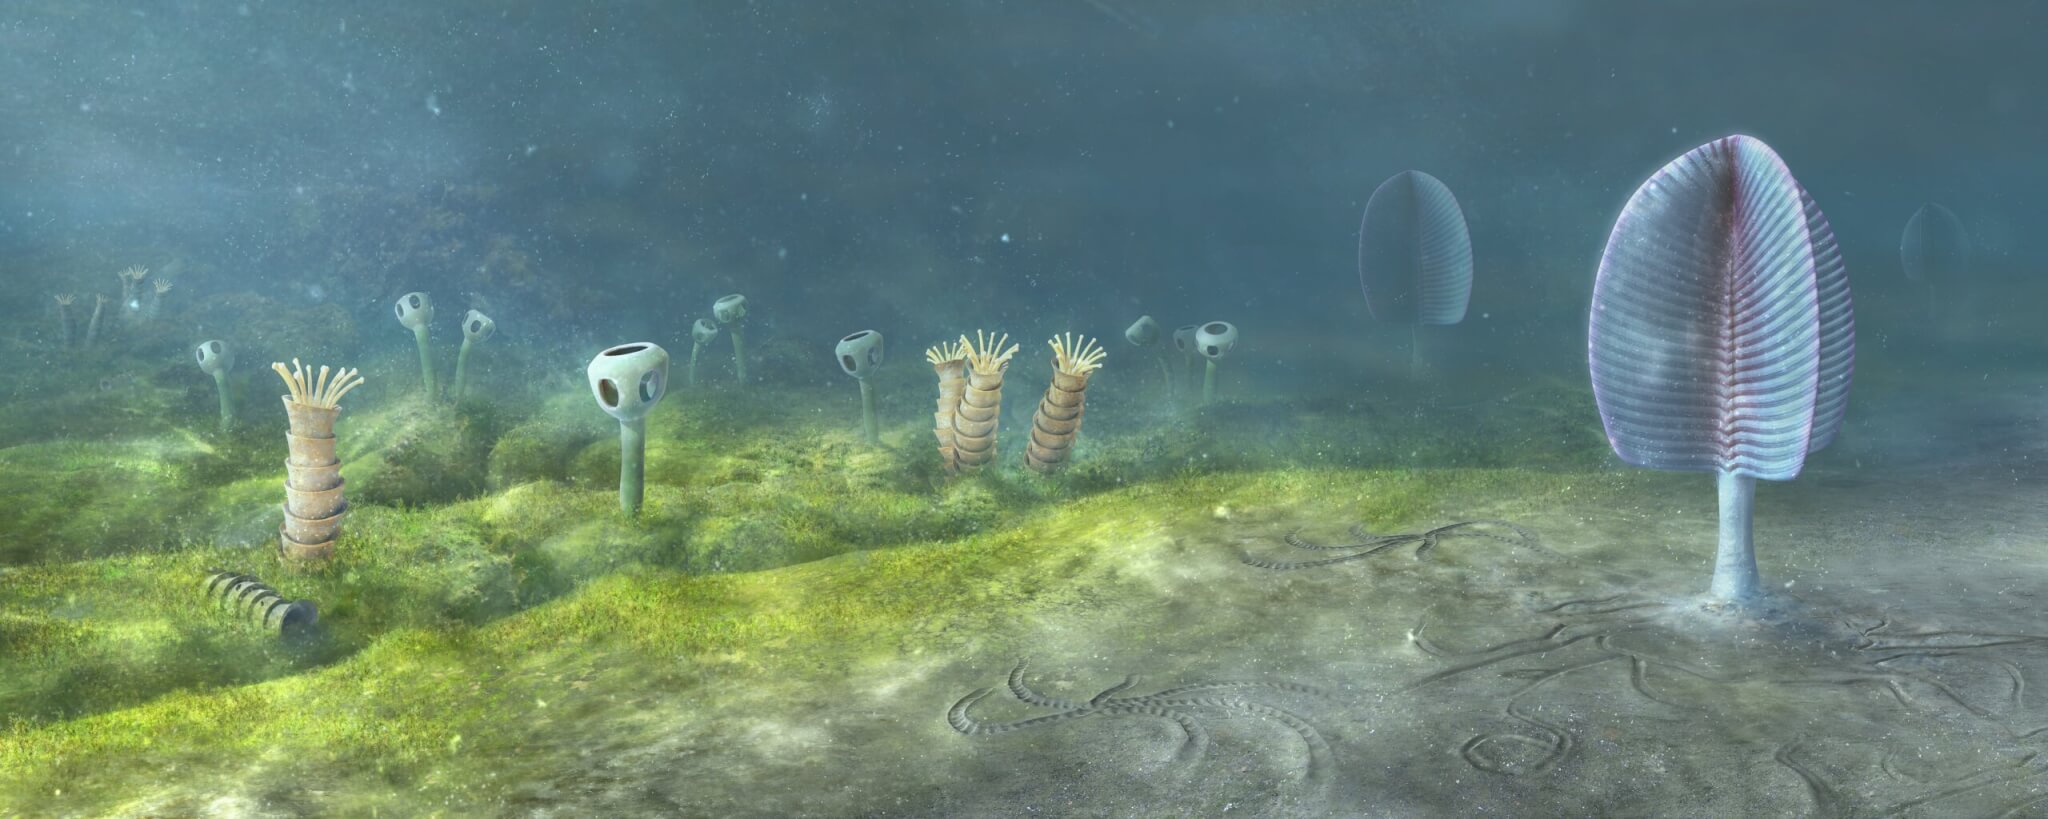 Reconstruction of the Ediacaran seafloor from the Nama Group, 